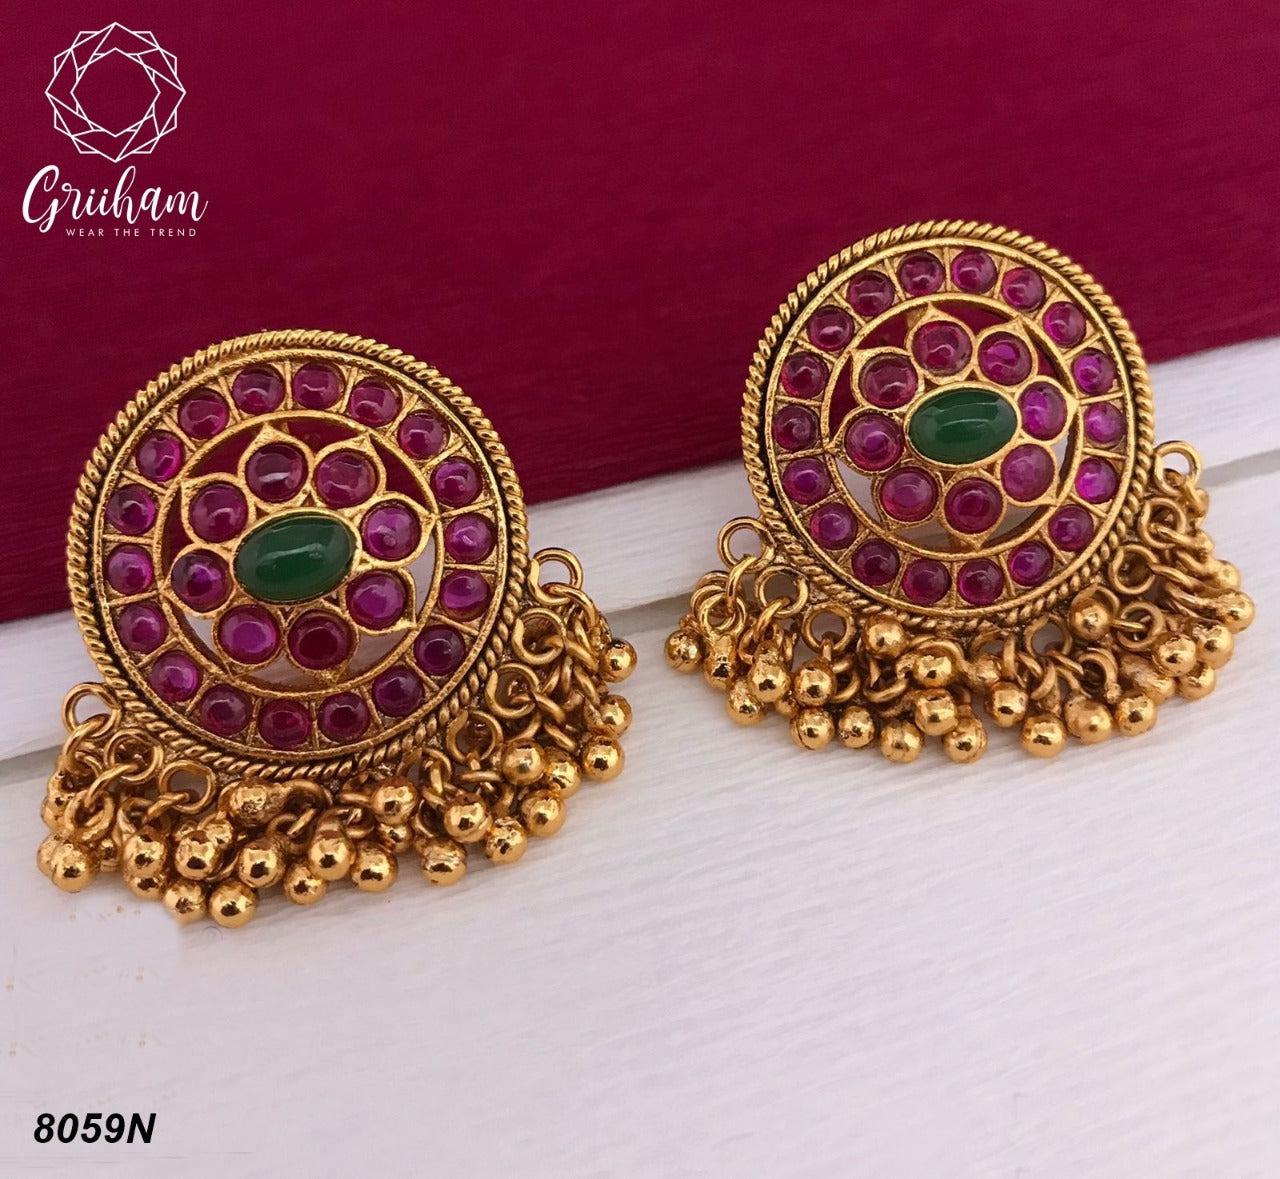 Micro Gold Finish Party Wear Earring / Jhumkas with AD stones 8059N-Jhumkas & Earrings-Griiham-Griiham